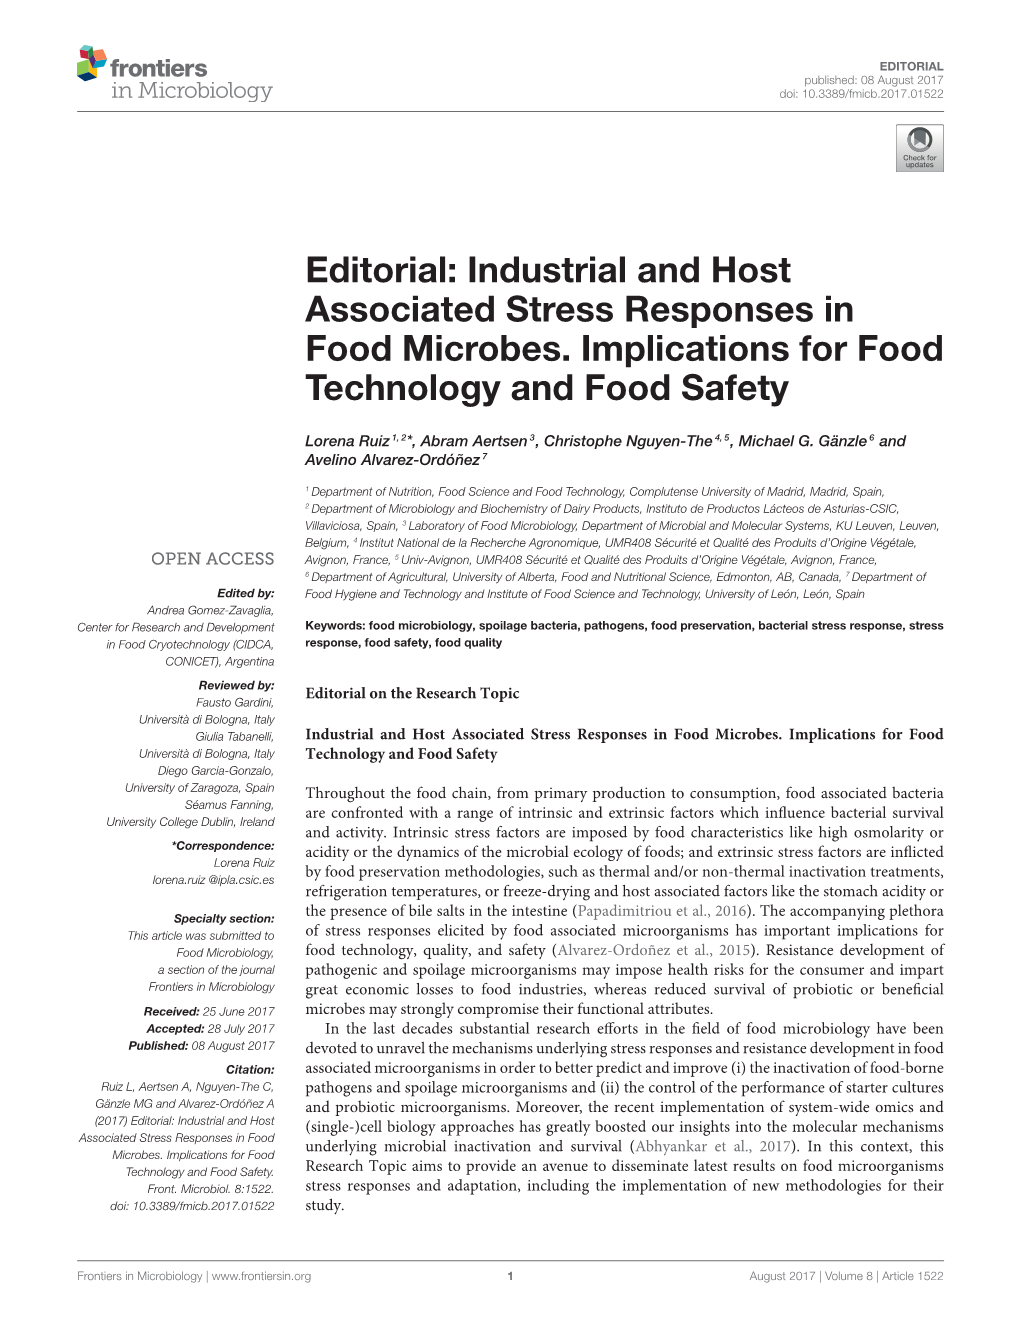 Editorial: Industrial and Host Associated Stress Responses in Food Microbes. Implications for Food Technology and Food Safety